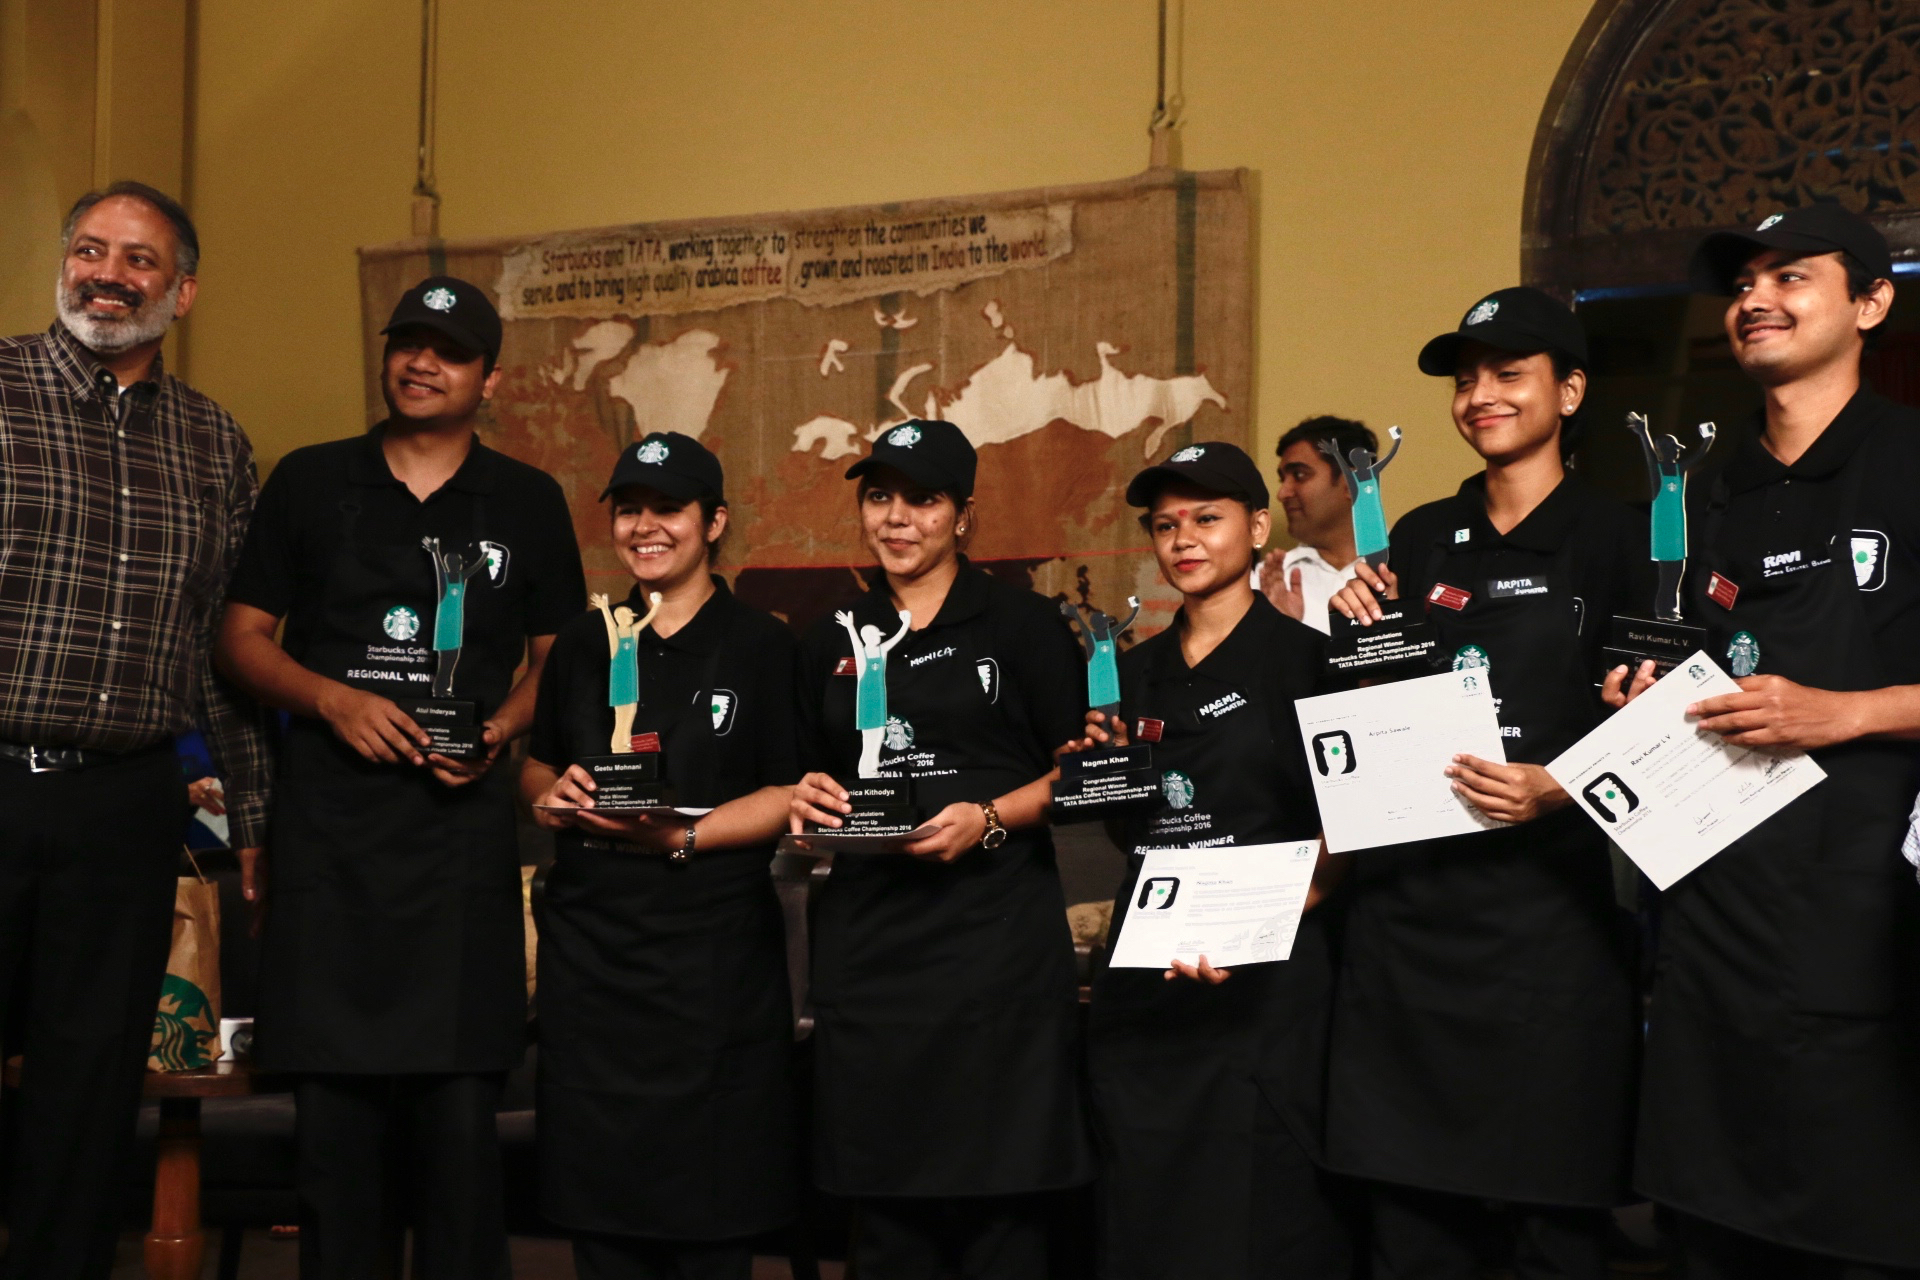 Espresso Yourself: Brewing Up a Storm at the Starbucks Coffee Championships